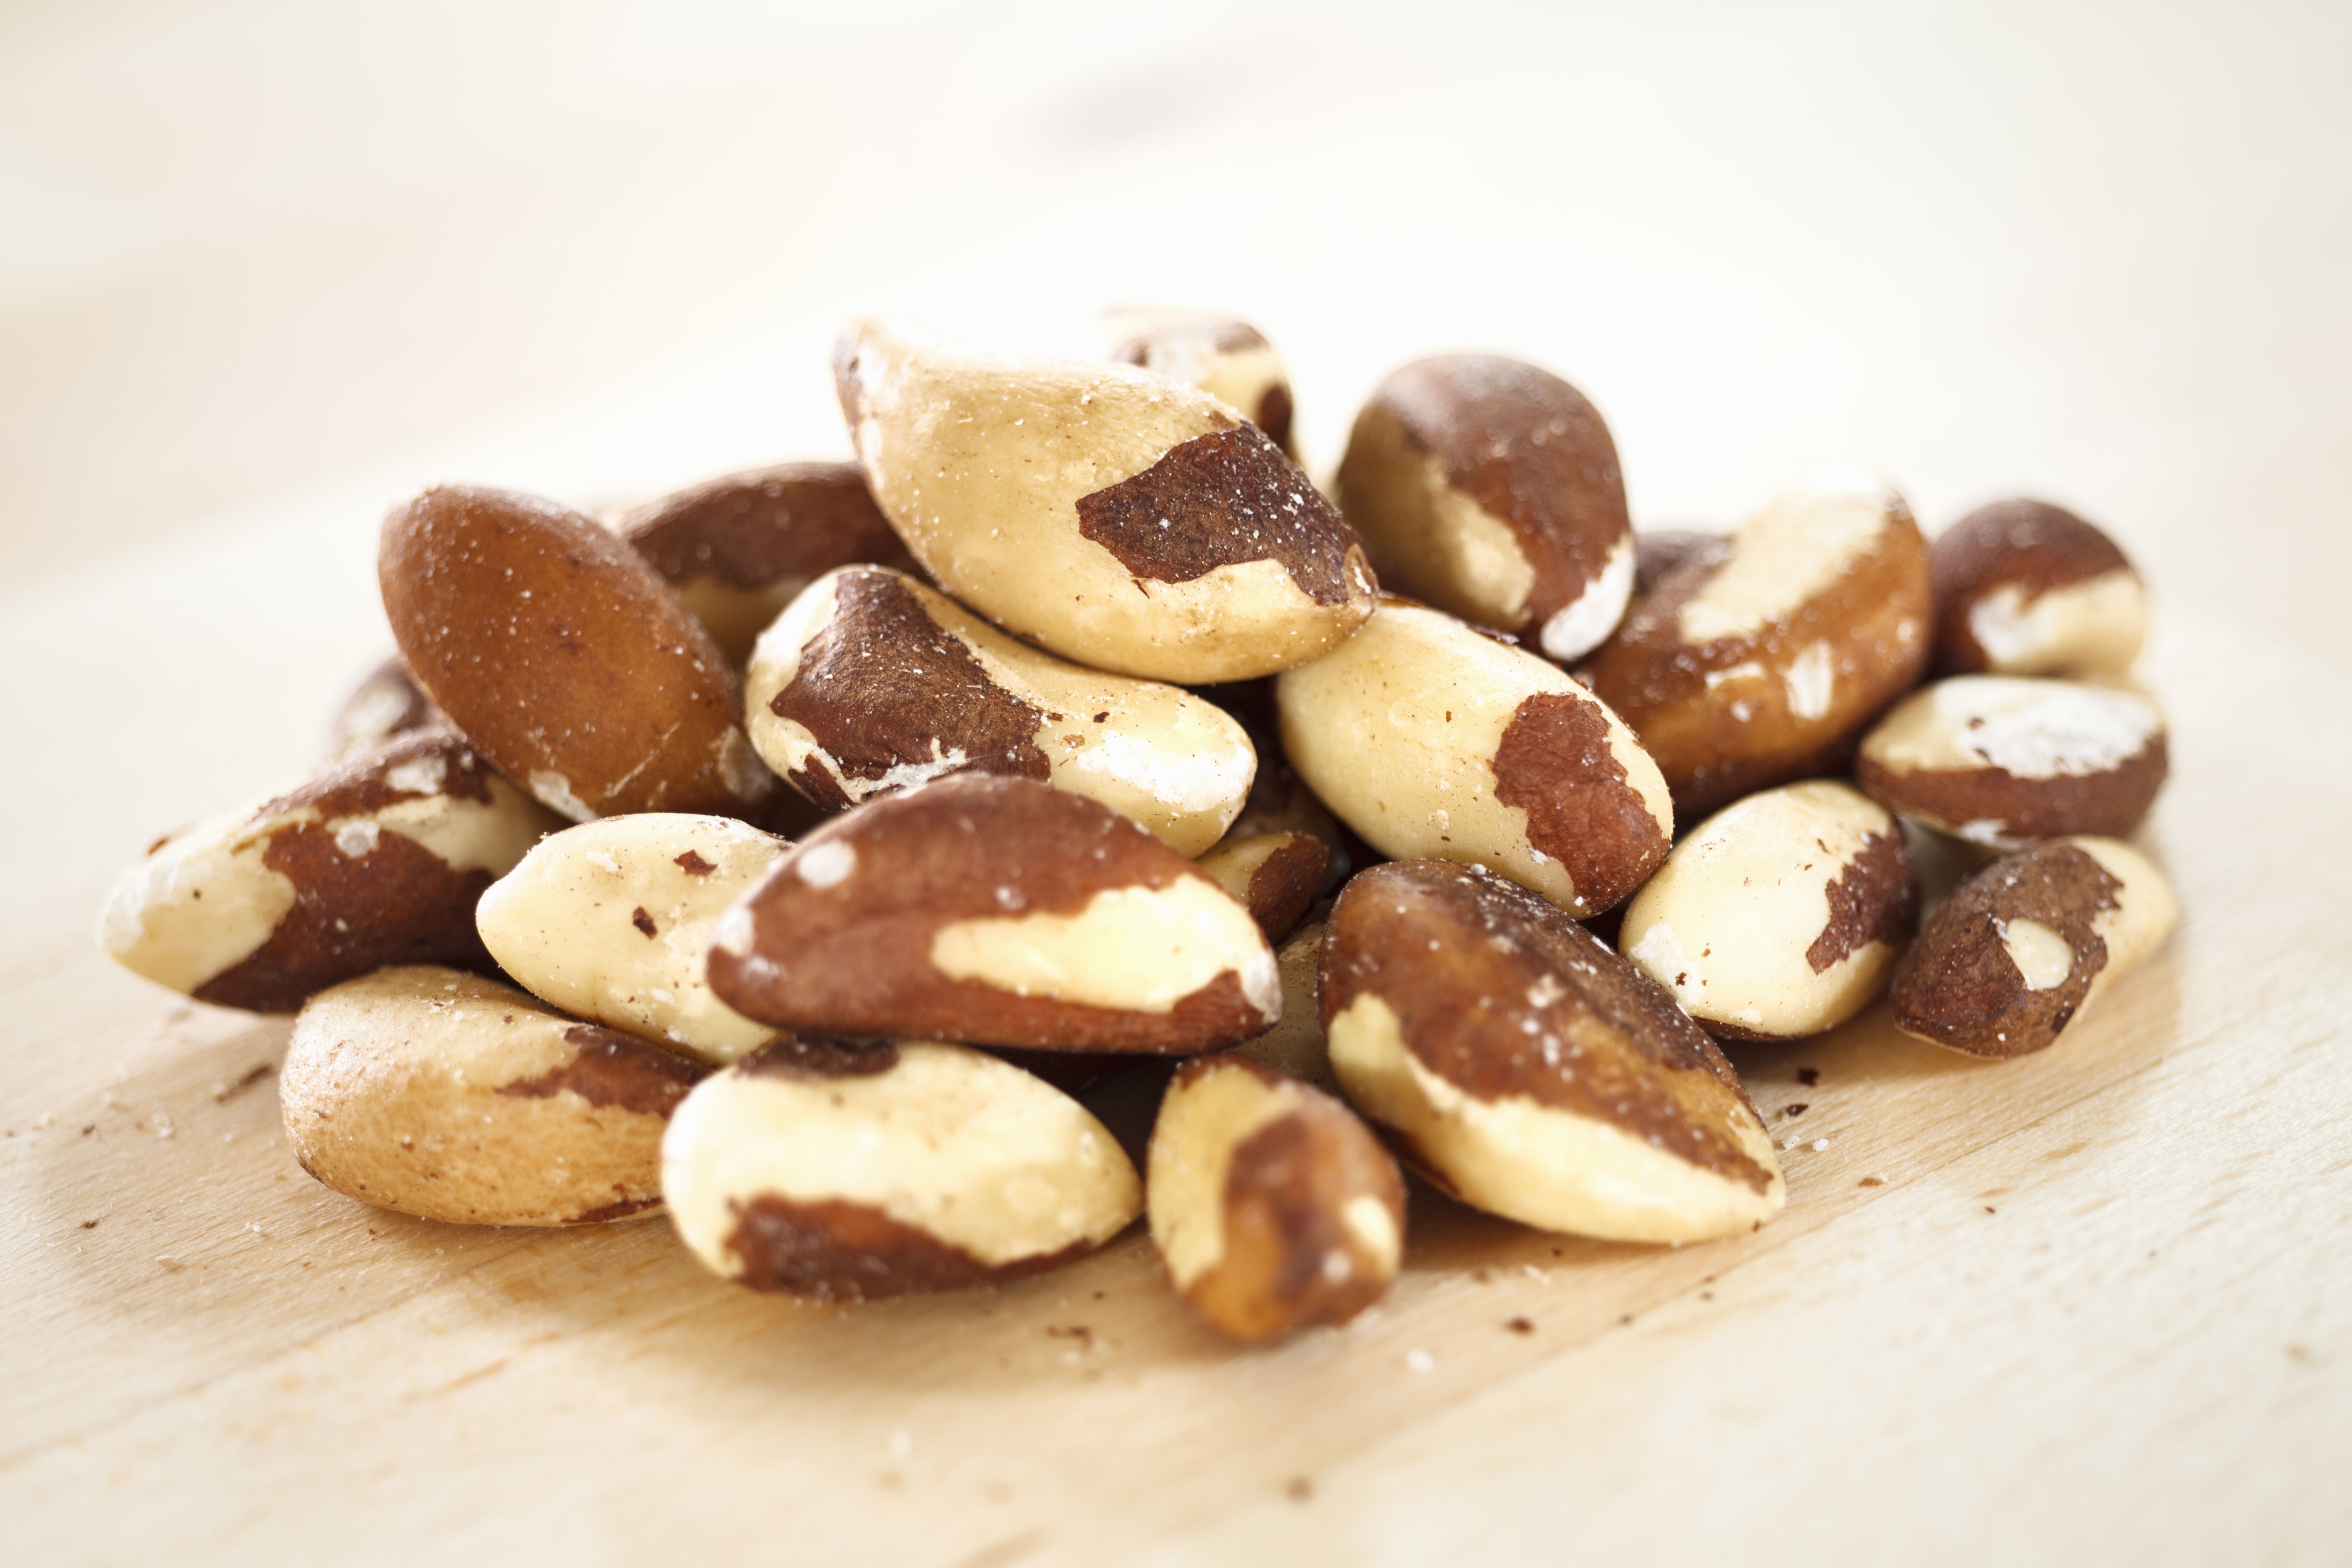 brazil-nut-nutrition-facts-calories-and-health-benefits